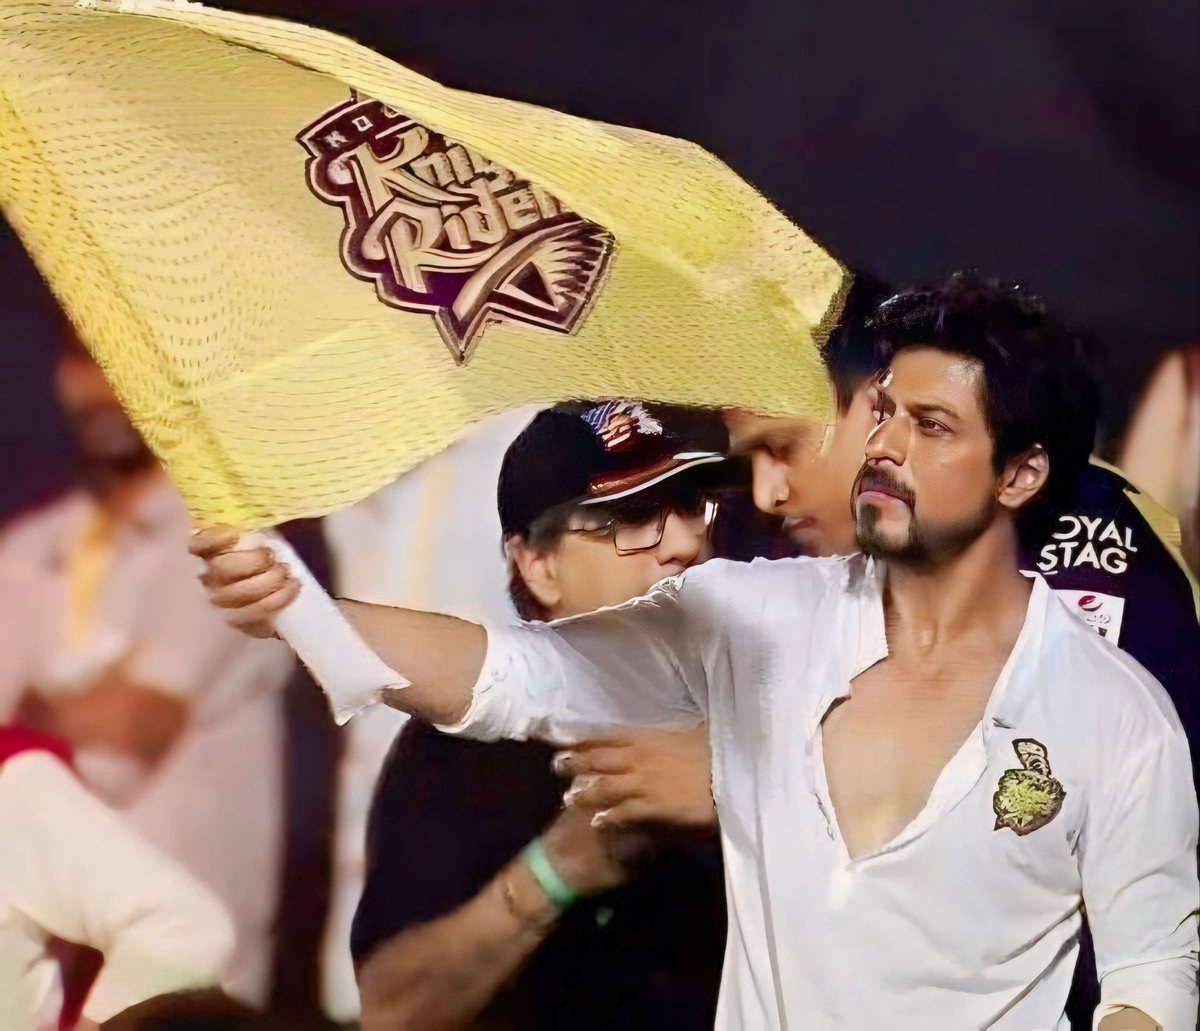 That’s right! We are born ready with the KING to keep that flag flyin’ high tomorrow night at the Eden Gardens 💜😍💛 #shahrukhkhan #SRK #AmiKKR #korbolorbojeetbo #KKRvsKXIP